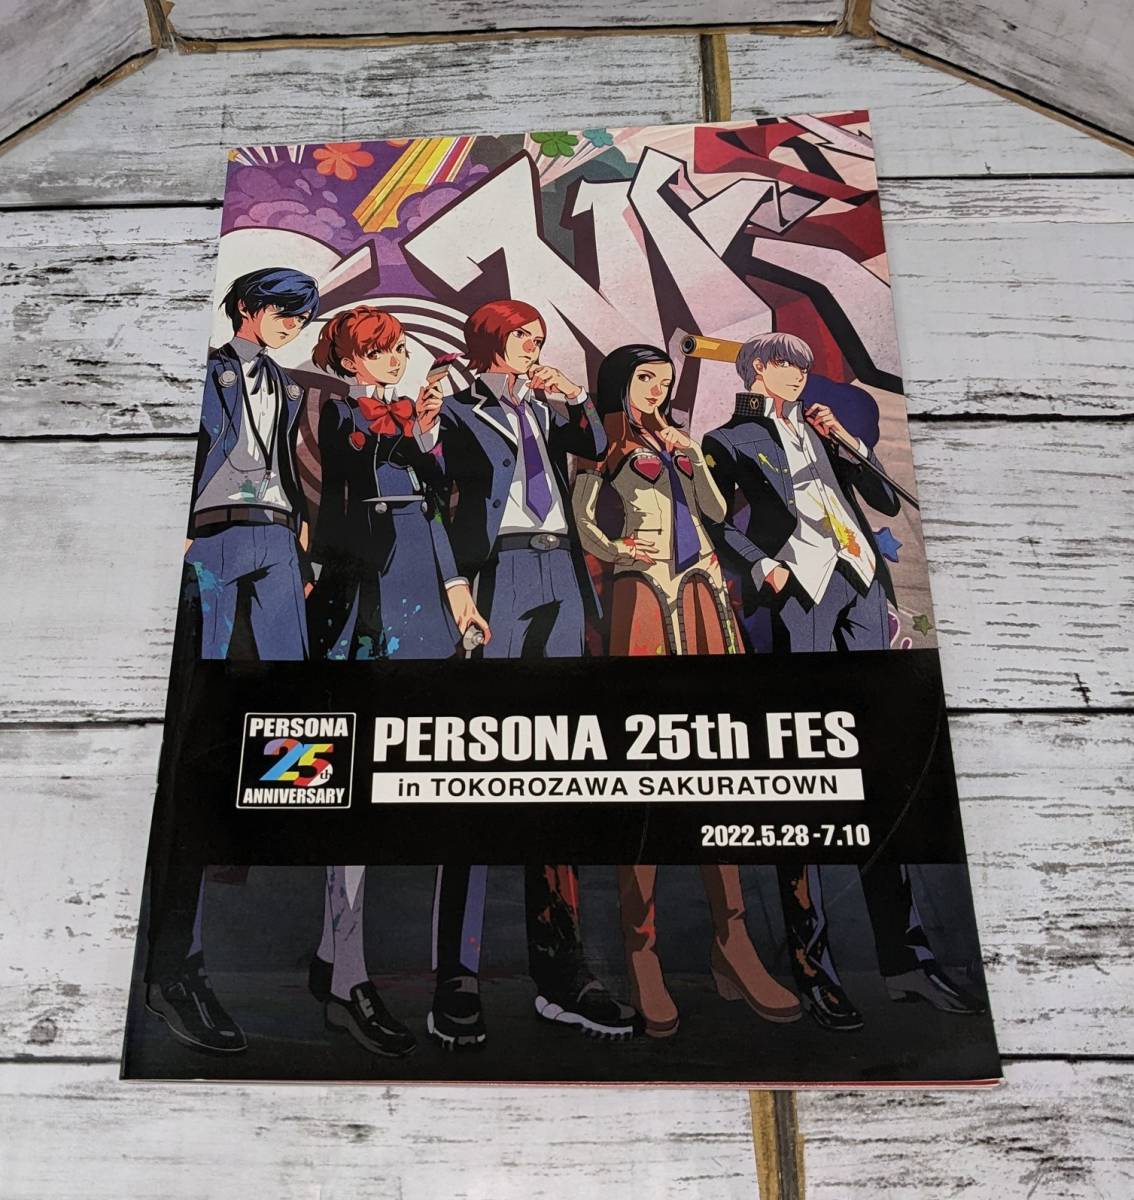 E02-1998 secondhand goods PERSONA 25th FES in TOKOROZAWA SAKURATOWN 2022.5.28-7.10 Persona 25 anniversary large exhibition viewing . pamphlet 